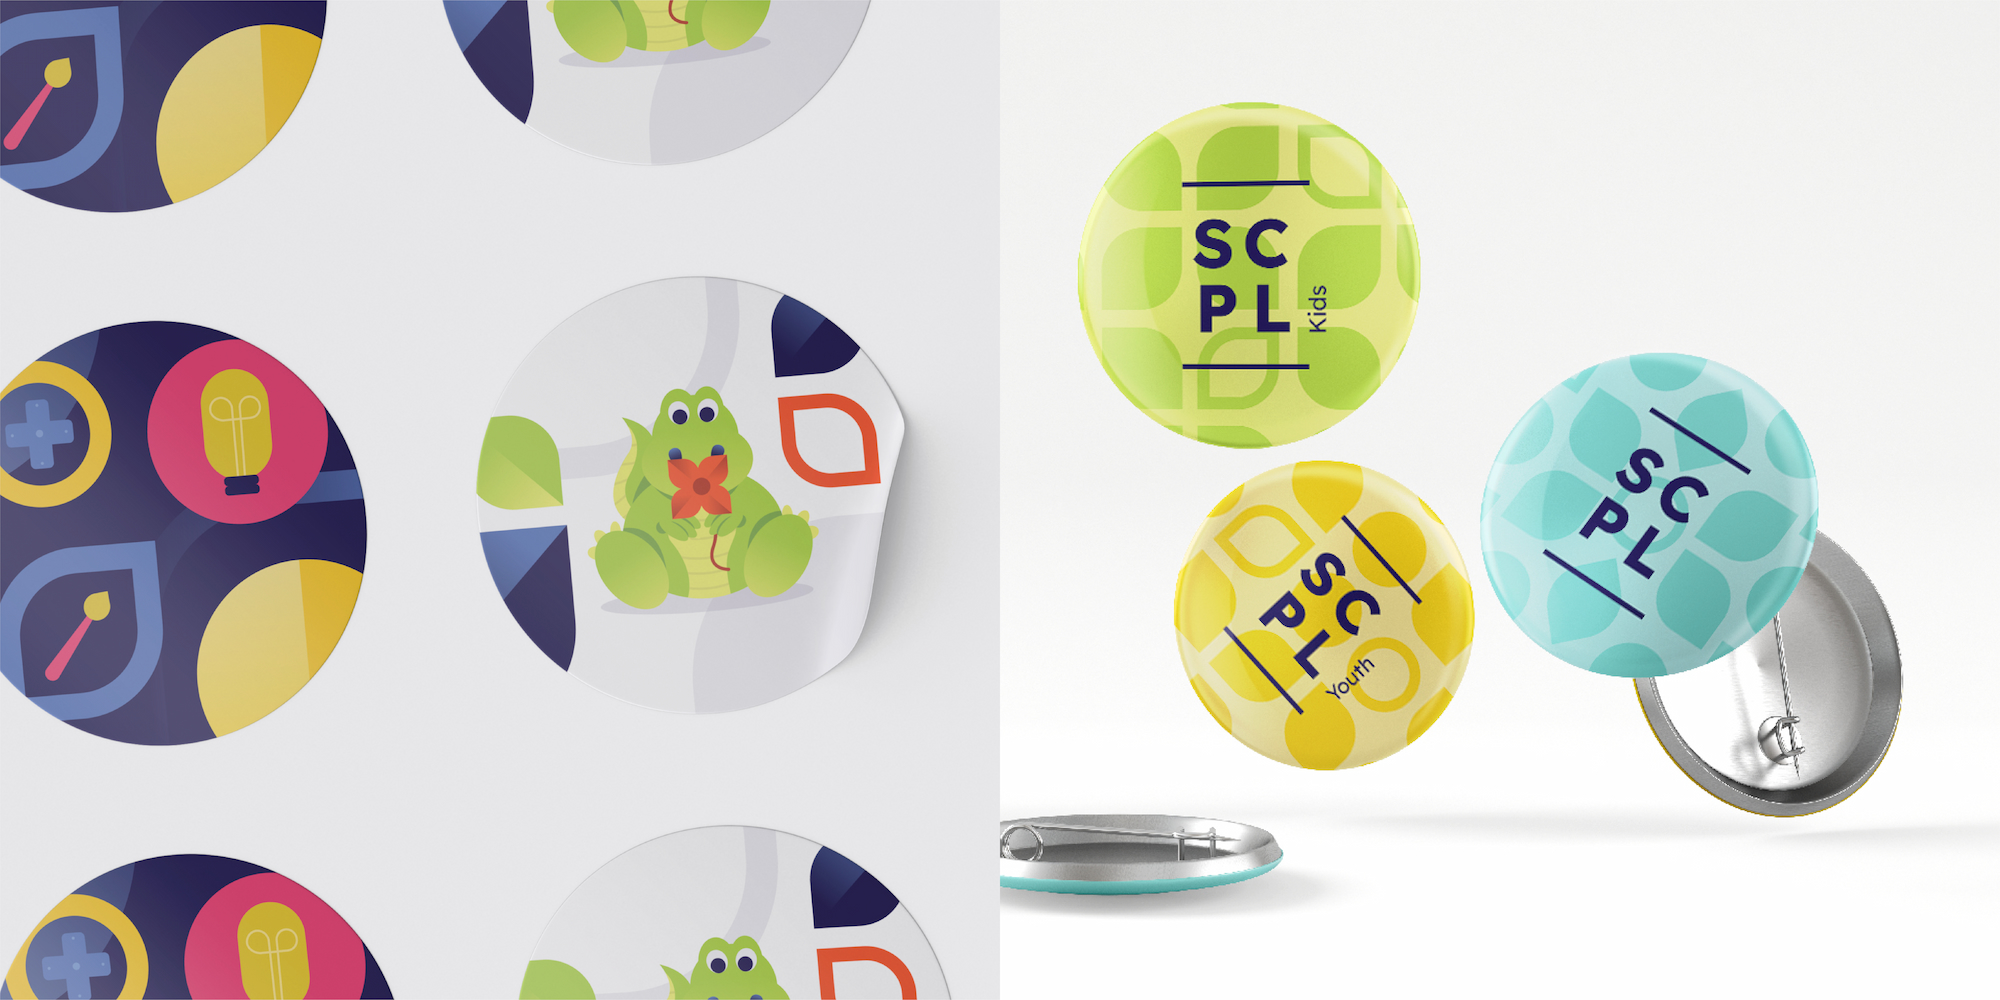 SCPL branded buttons